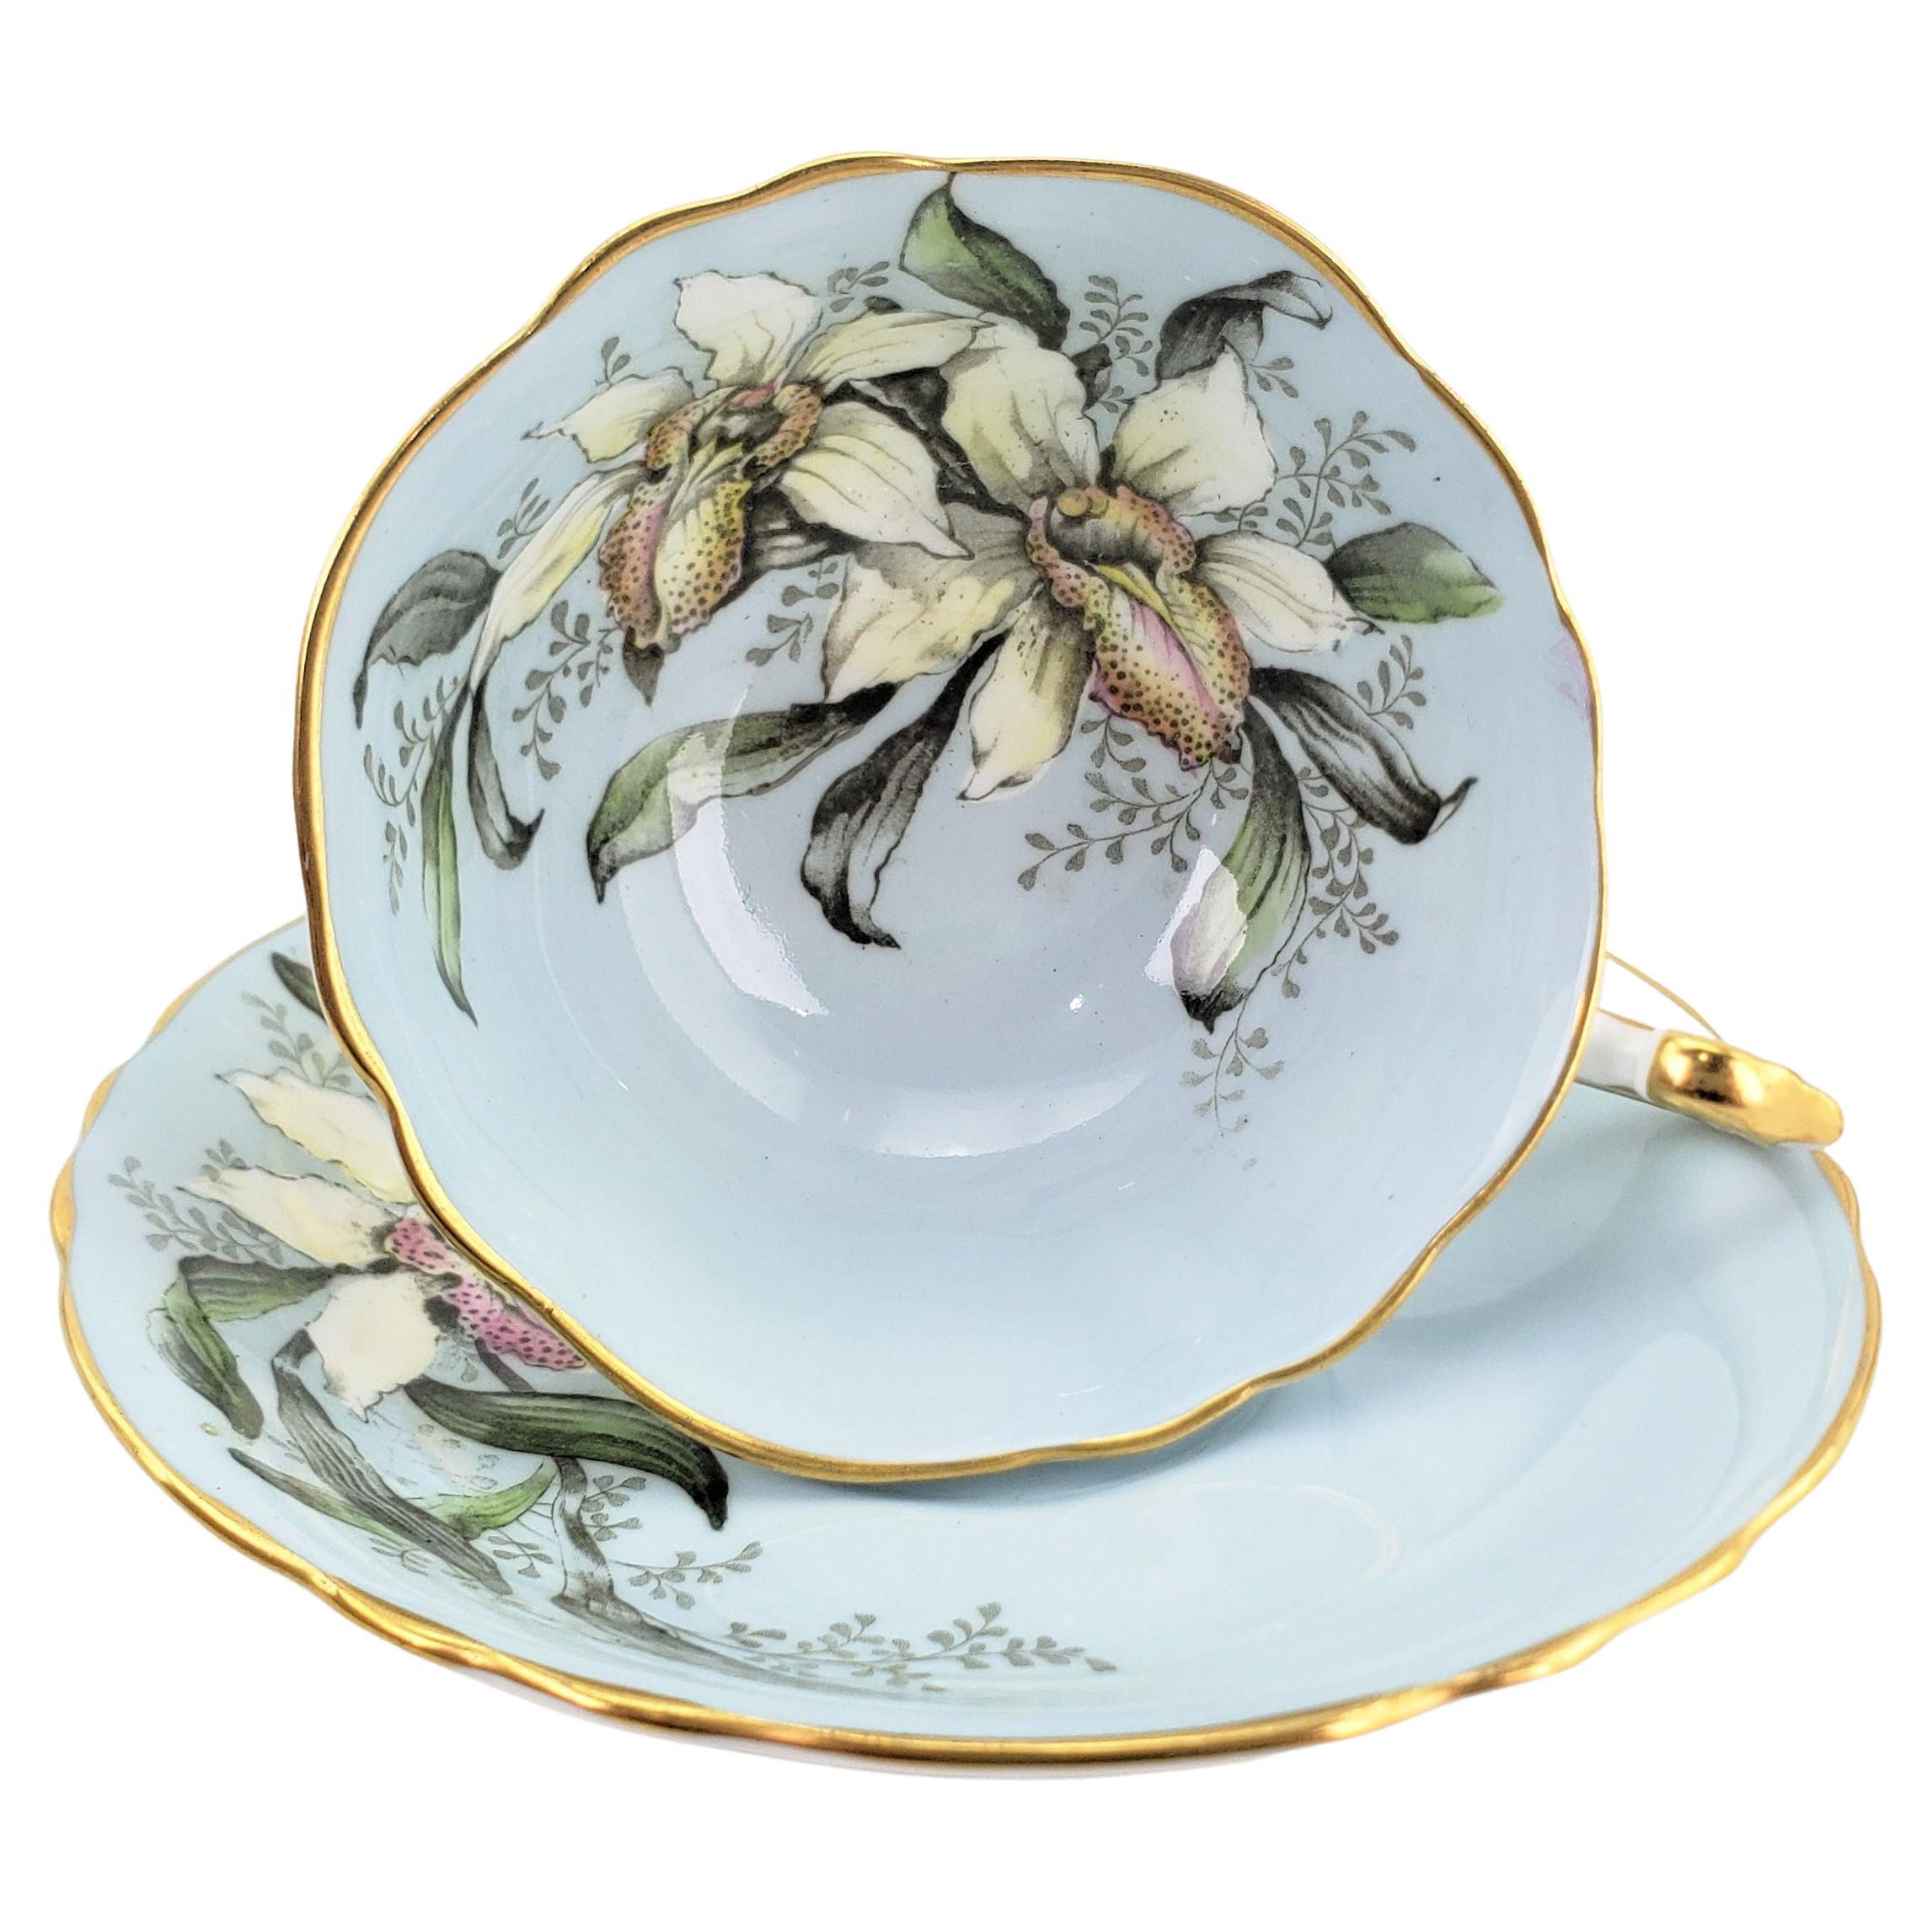 Vintage Paragon Double Warrant Bone China Teacup & Saucer with Floral Pattern For Sale